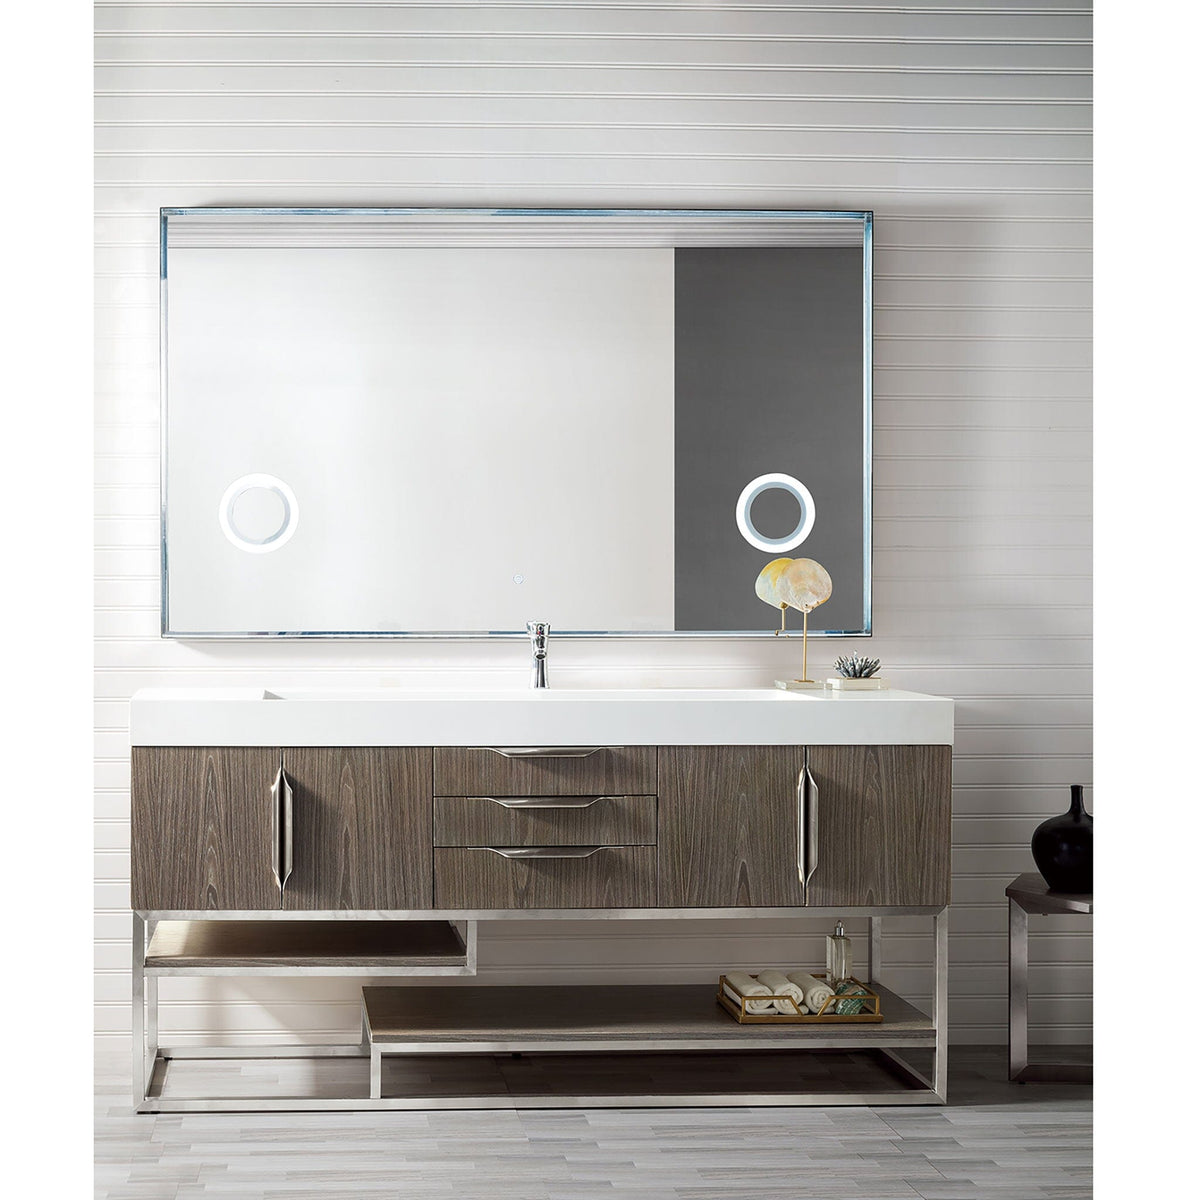 72" Columbia Single Bathroom Vanity, Ash Gray w/ Brushed Nickel Base and Glossy White Composite Stone Top